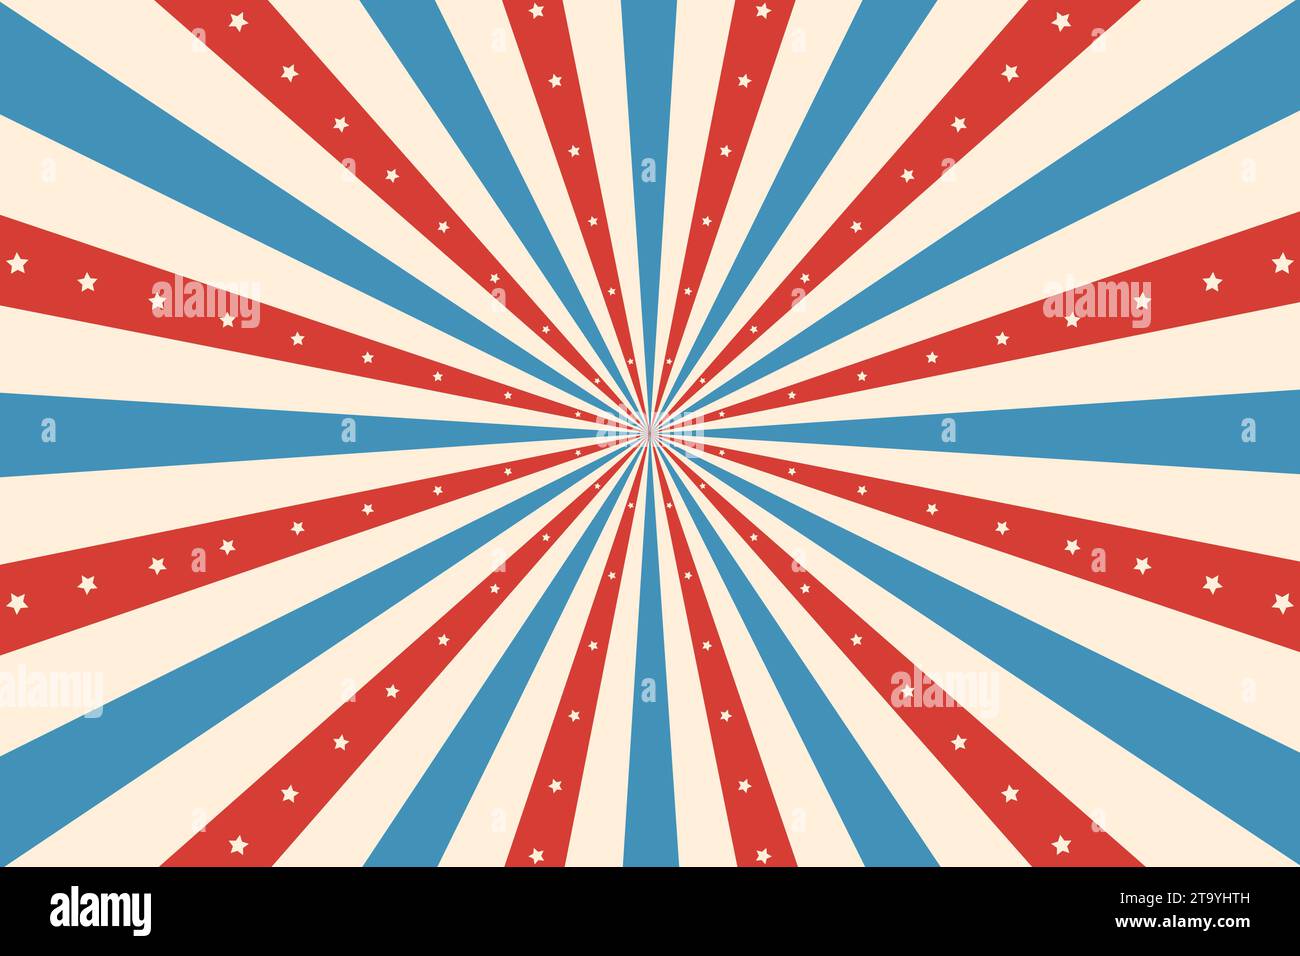 Vintage circus rays background. Vector vibrant retro backdrop, burst of red, blue or white radiating rays and stars, in style of usa flag. A nostalgic explosion of hues that takes you back to the past Stock Vector